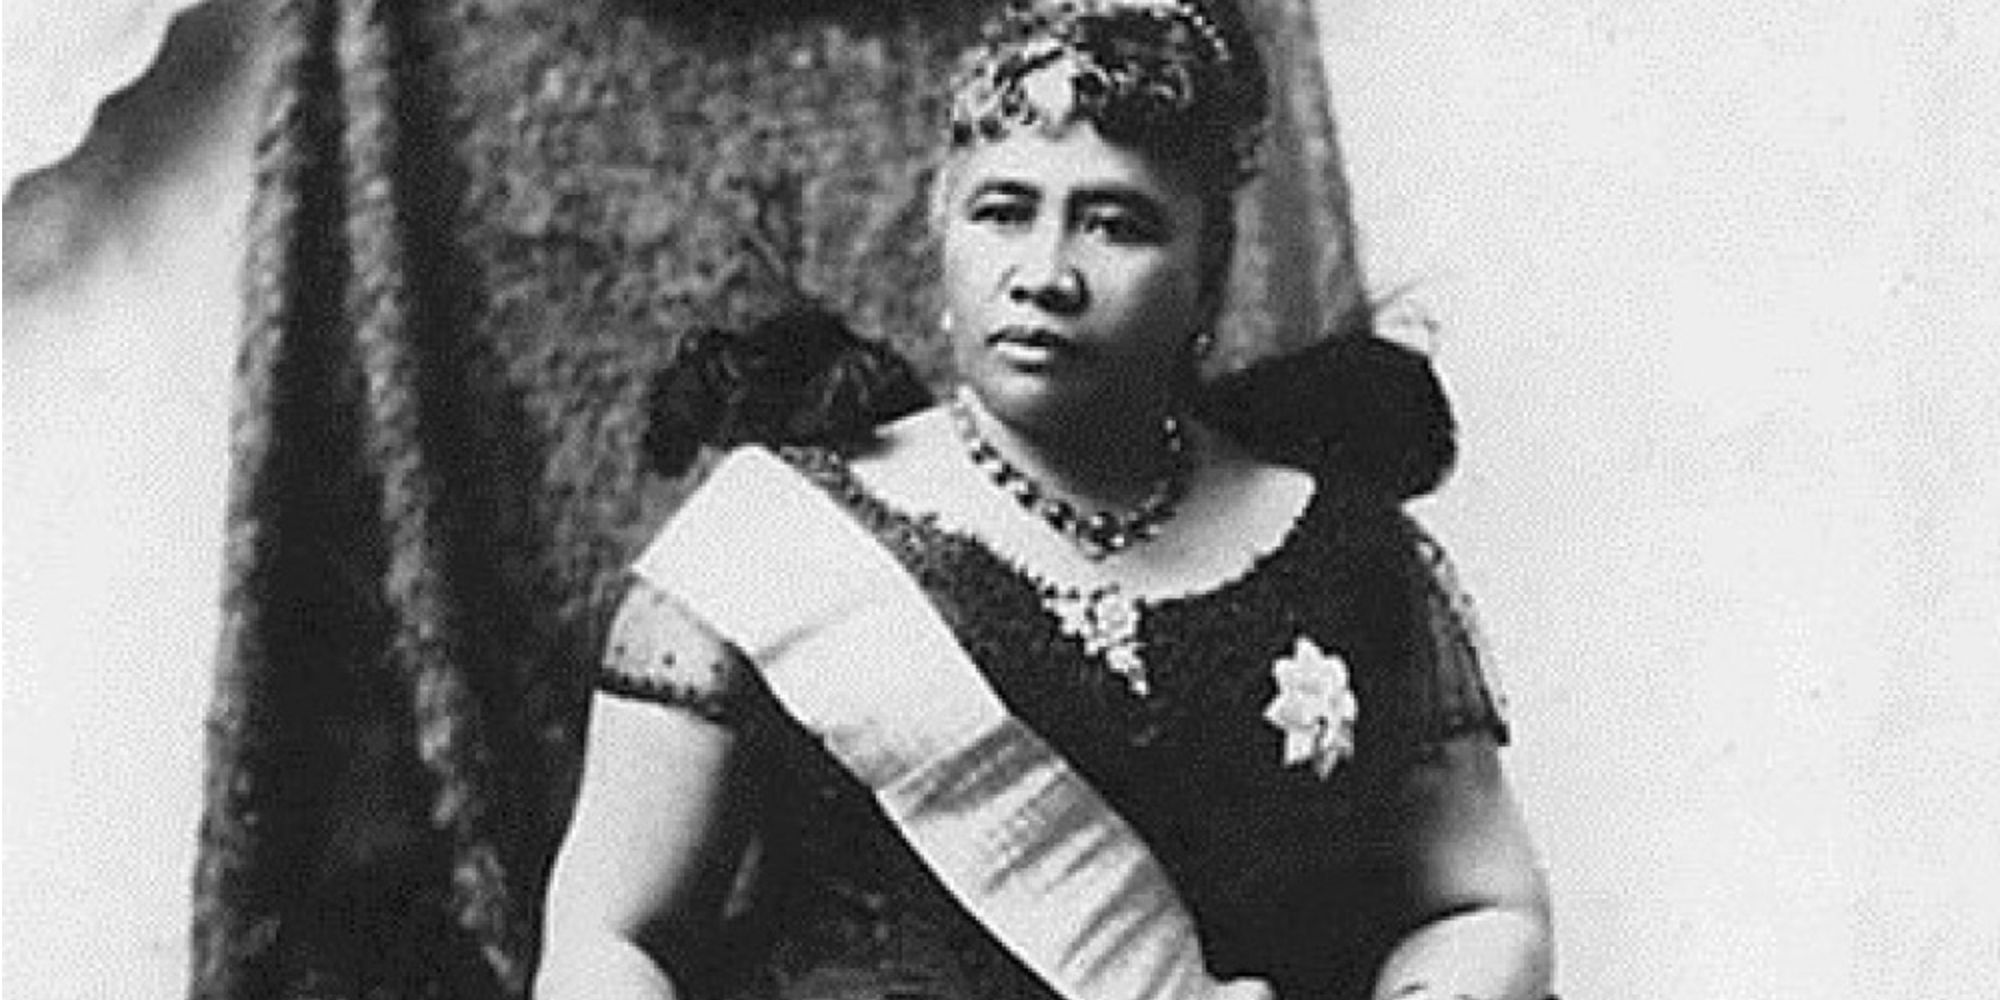 Queen Liliʻuokalani sits upon her throne